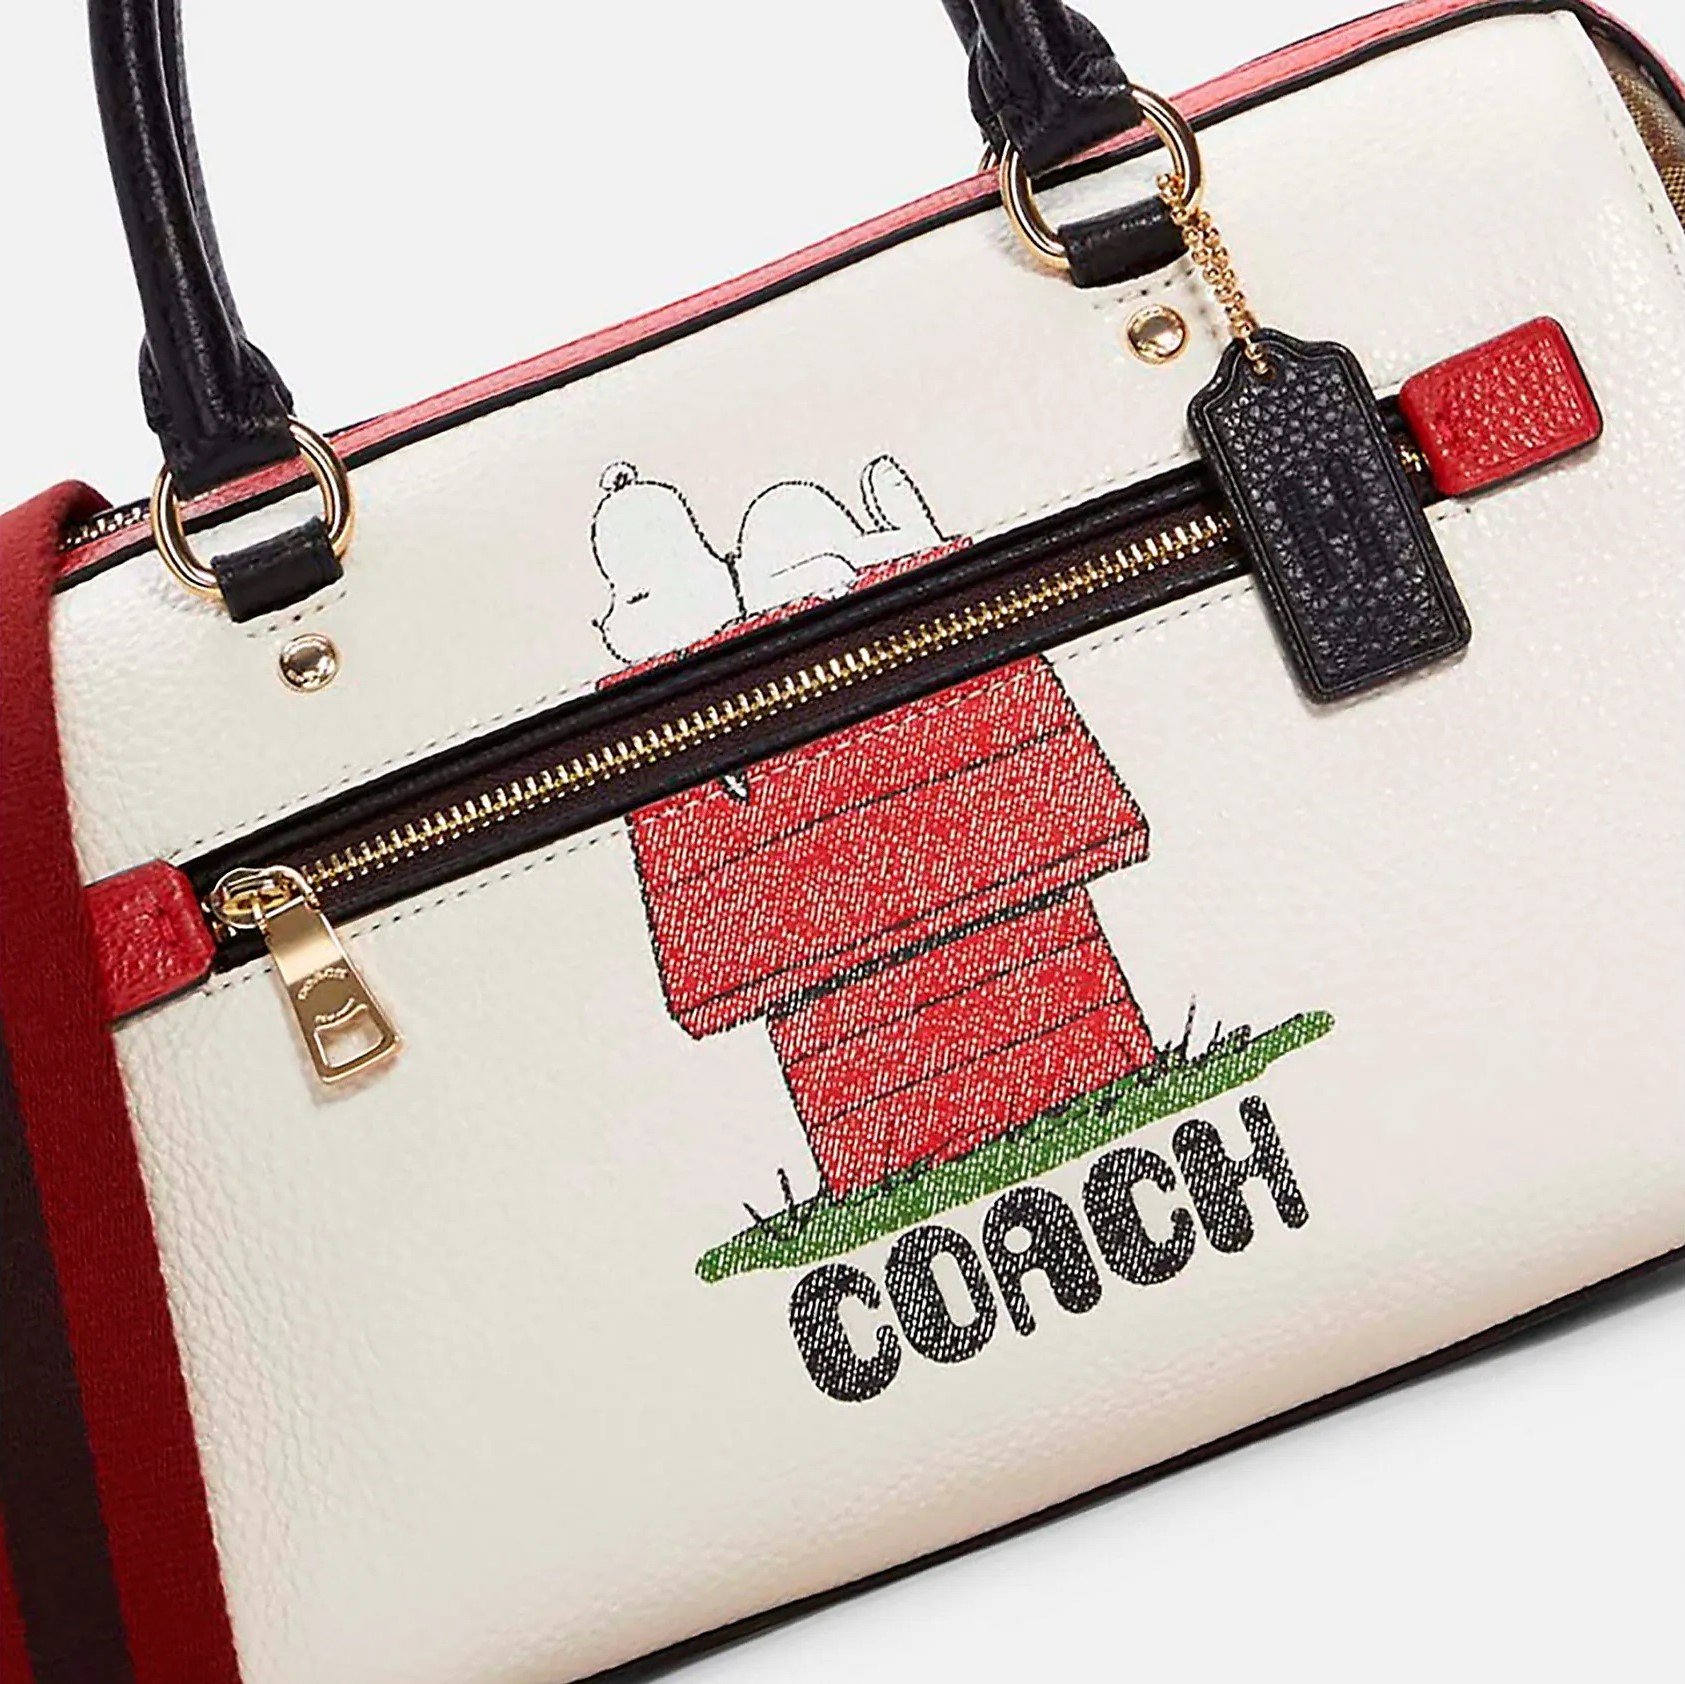 TÚI TRỐNG COACH PEANUT SNOOPY COLLECTION 7